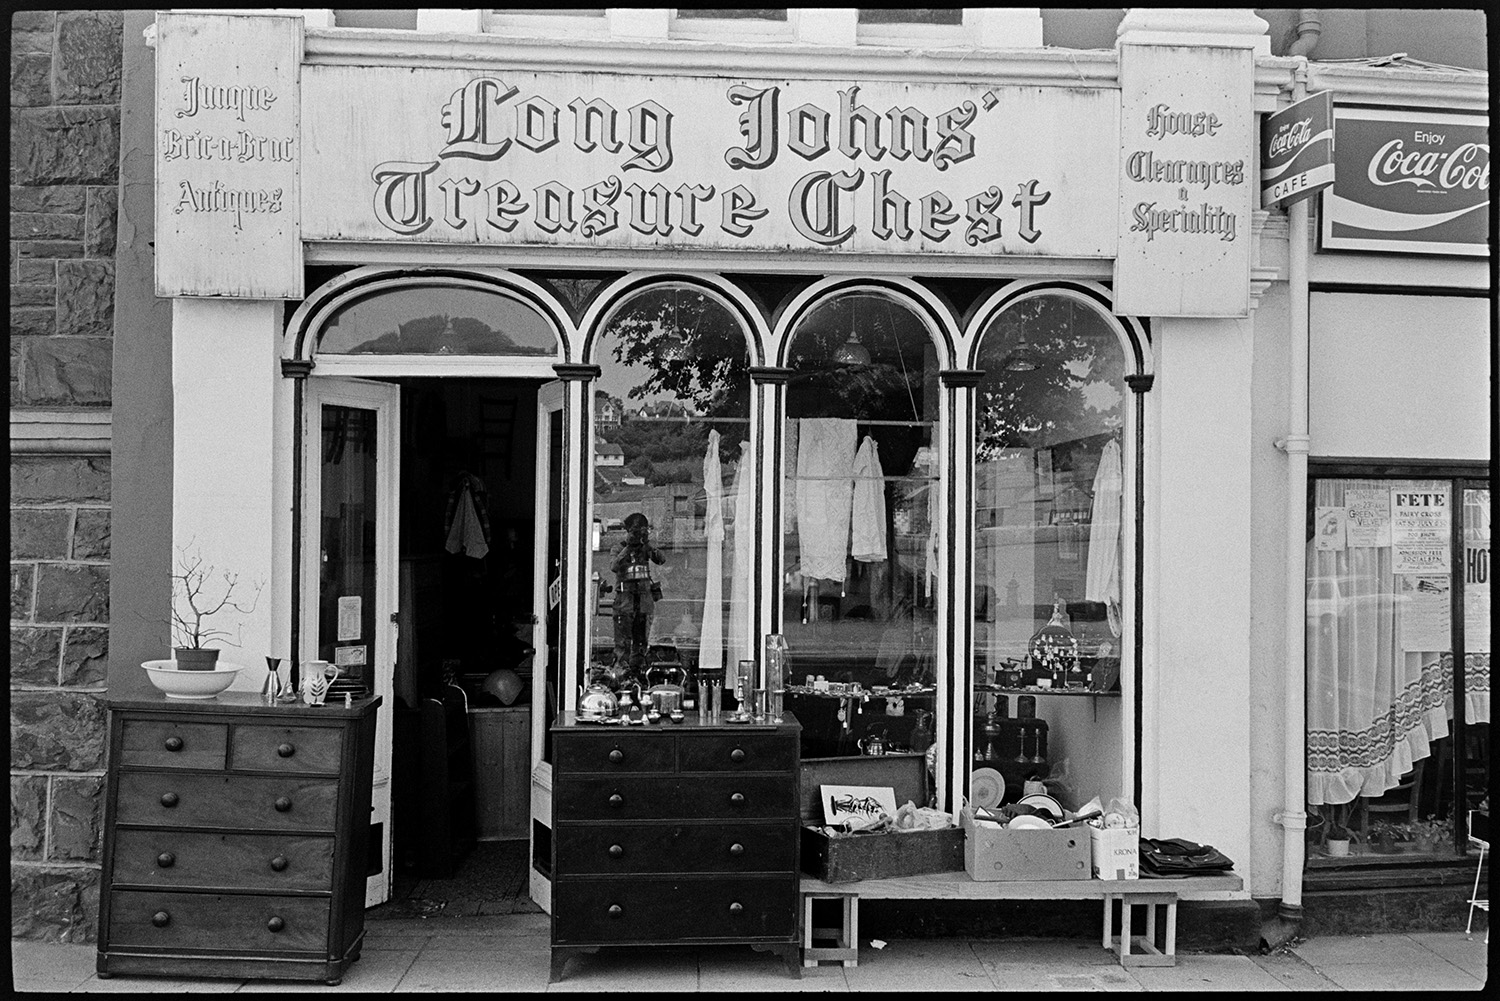 Interior of Antique shop, also exterior view of front of shop. 
[The shop front window of Long Johns' Treasure Chest antique shop on Bideford Quay. Various items including two chests of drawers are on display outside the shop.]